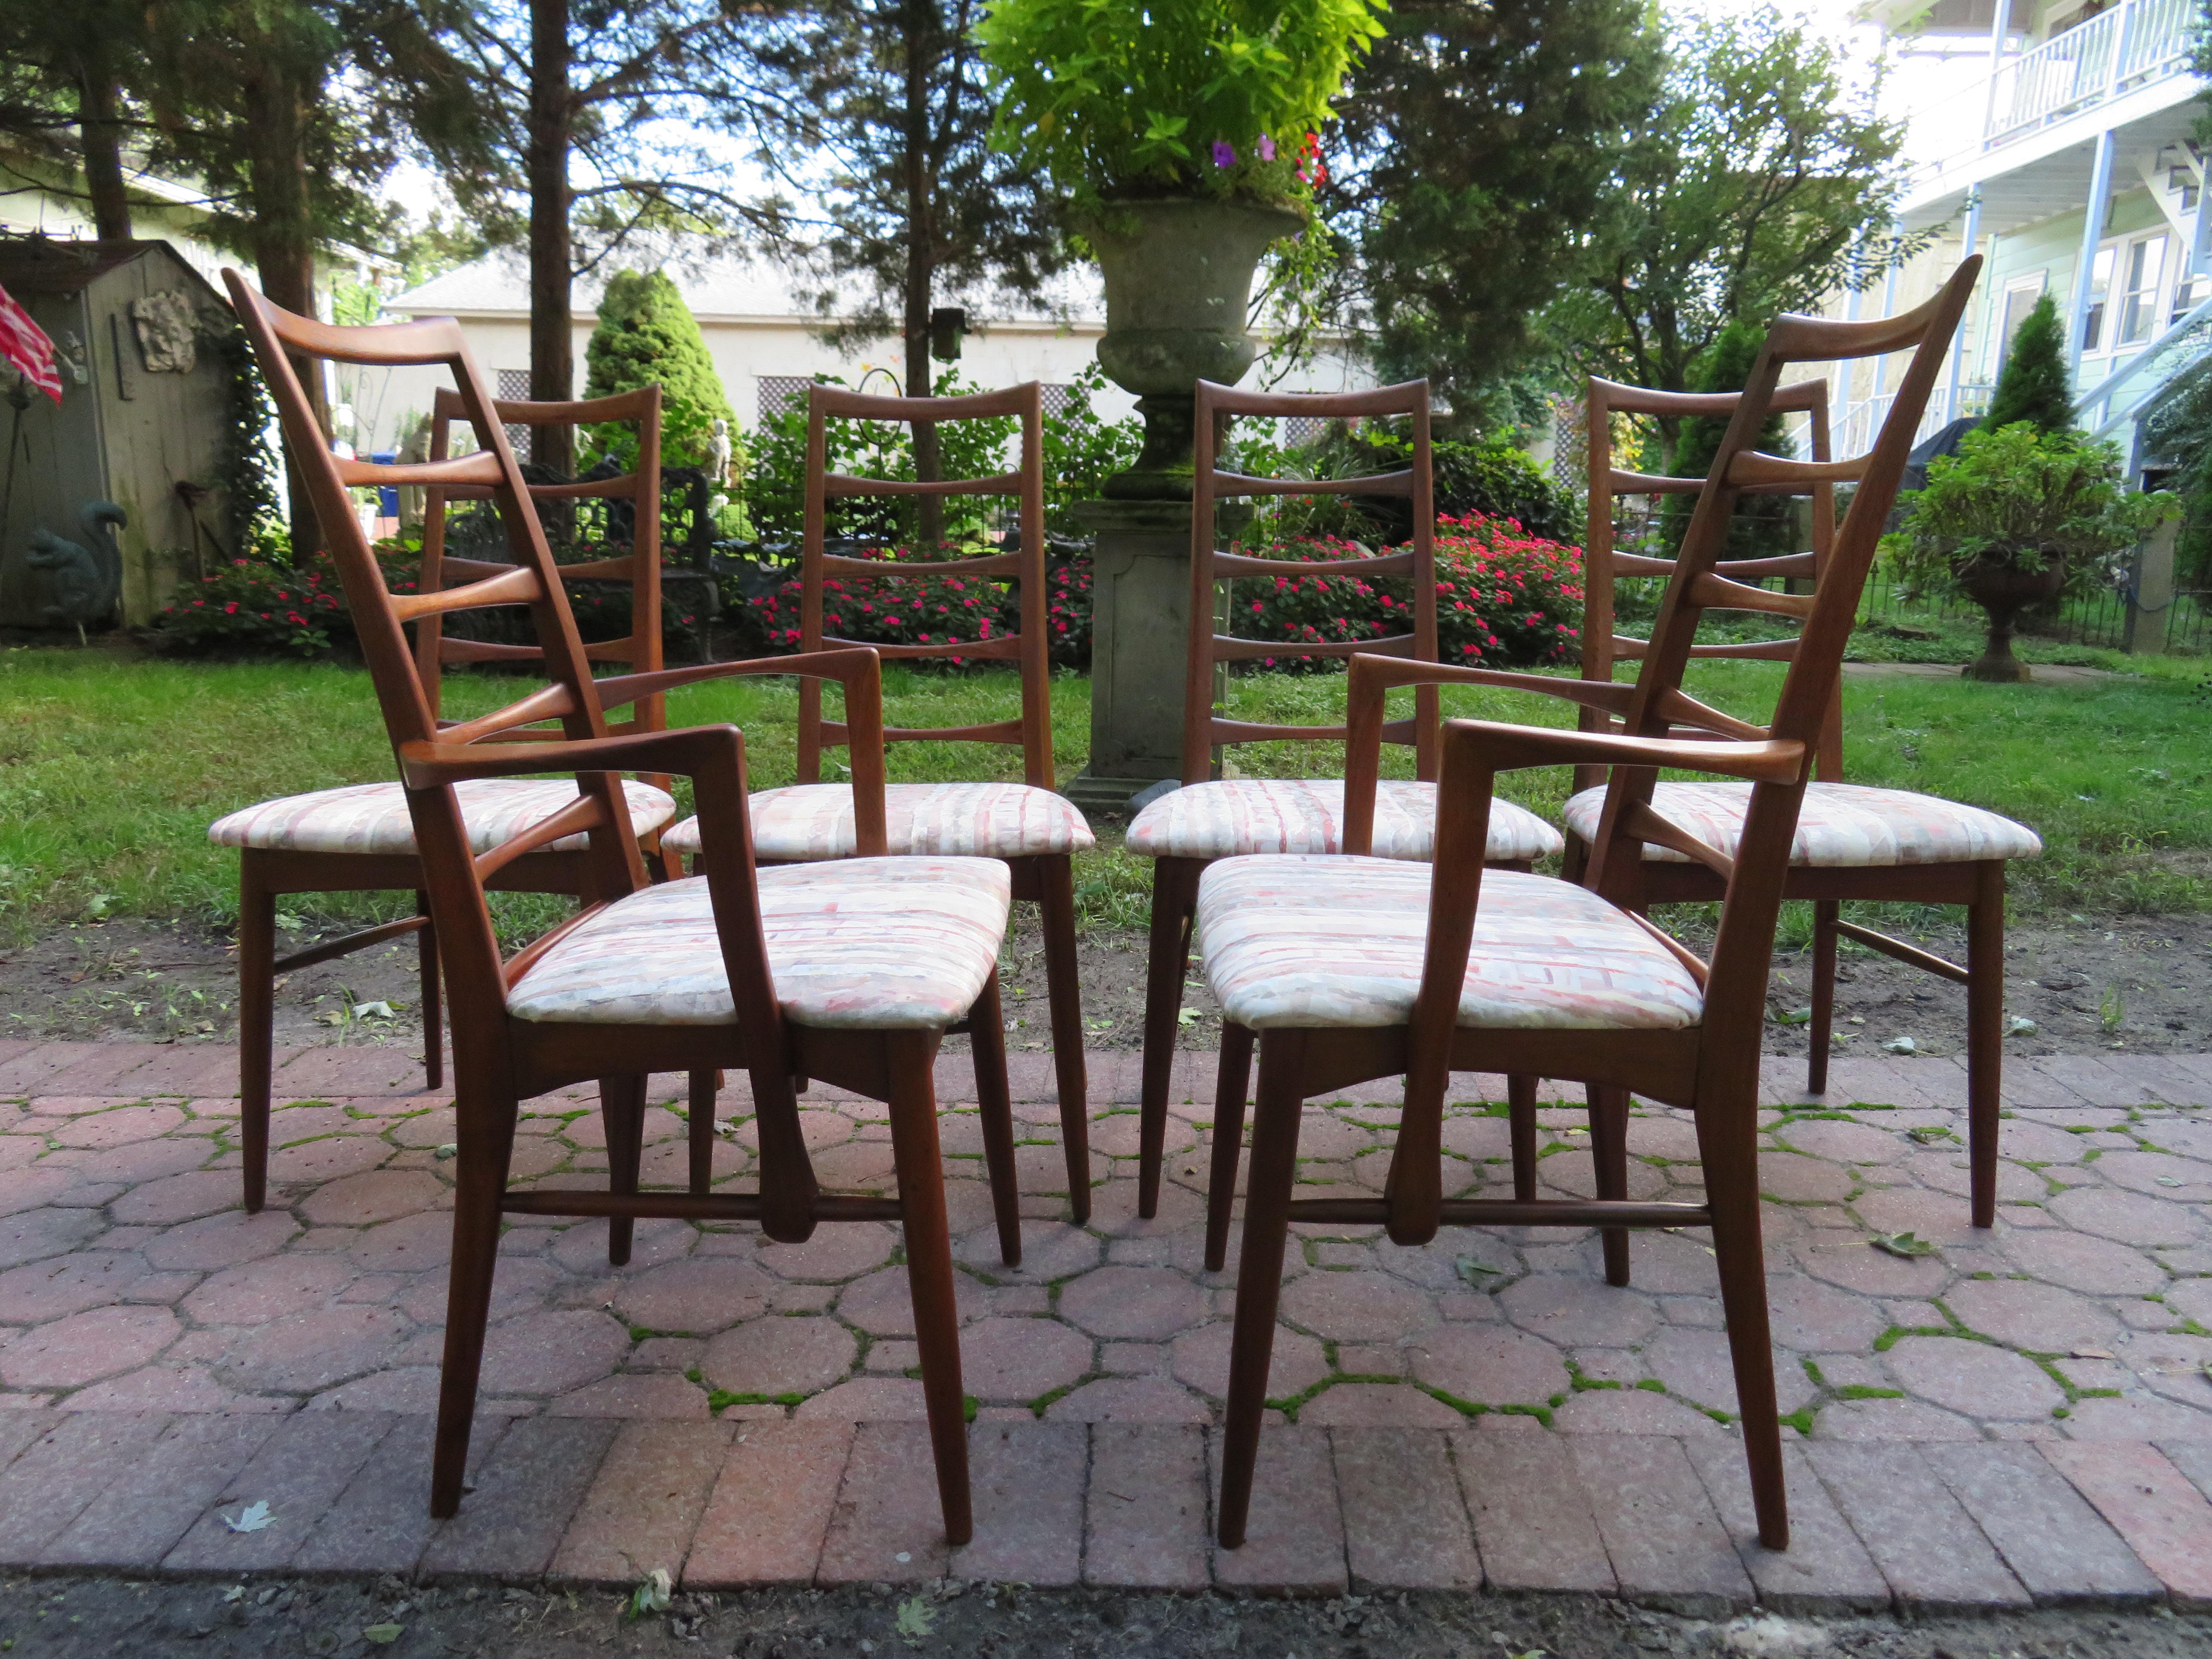 Outstanding set of six signed teak Koefoeds Hornslet ladderback dining chair. The teak has a gorgeous vintage dark patina and is a walnut color. The seat pads look nice but are easily reupholstered for a fresher look. The frames are tight and sturdy